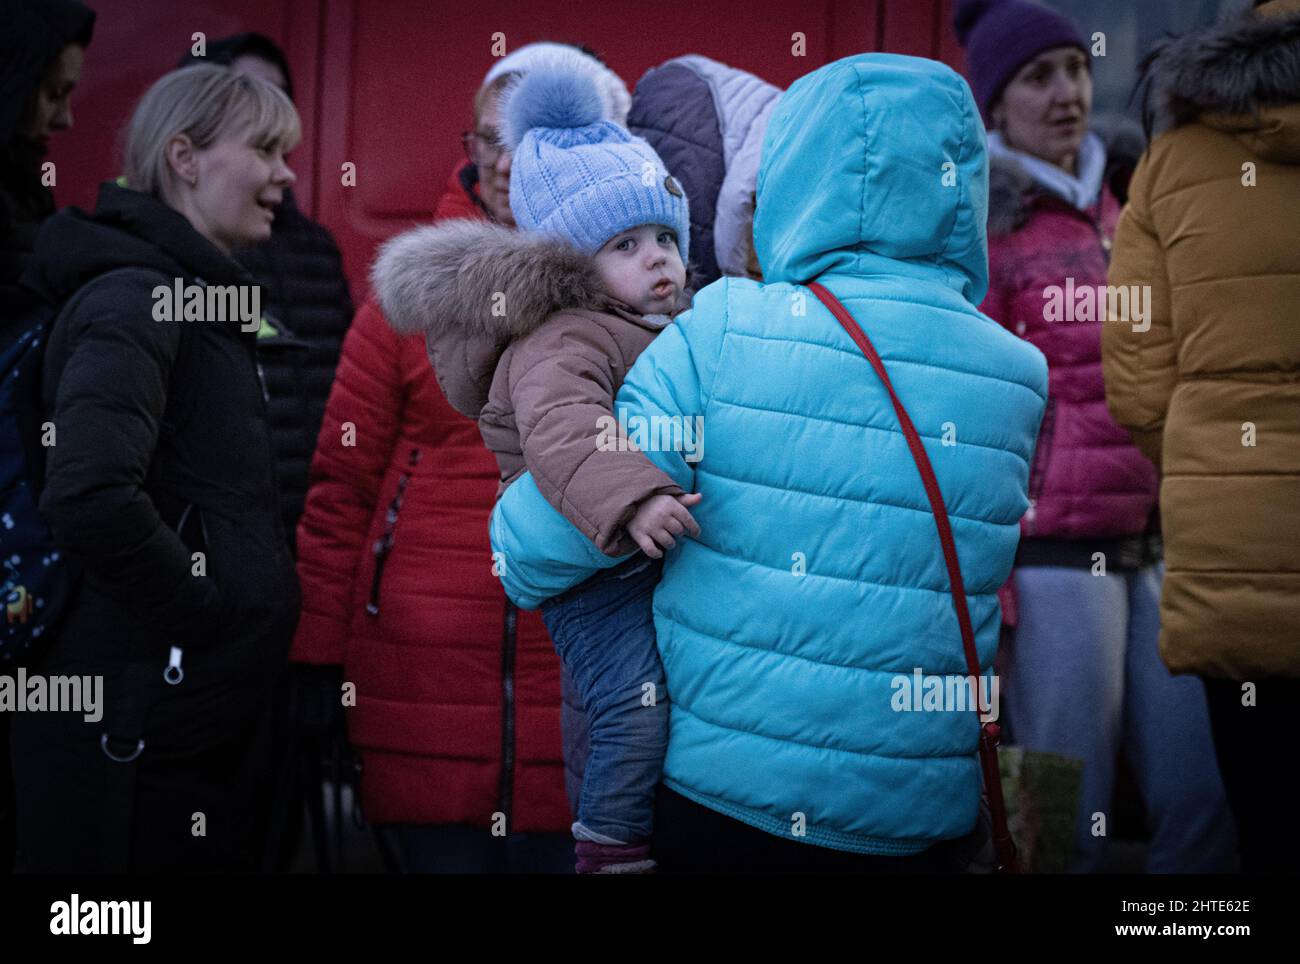 Desperation grows at Ukraine border as more than half a million refugees flee war - Copyright: Bel Trew/The Independent (Must Credit) Stock Photo